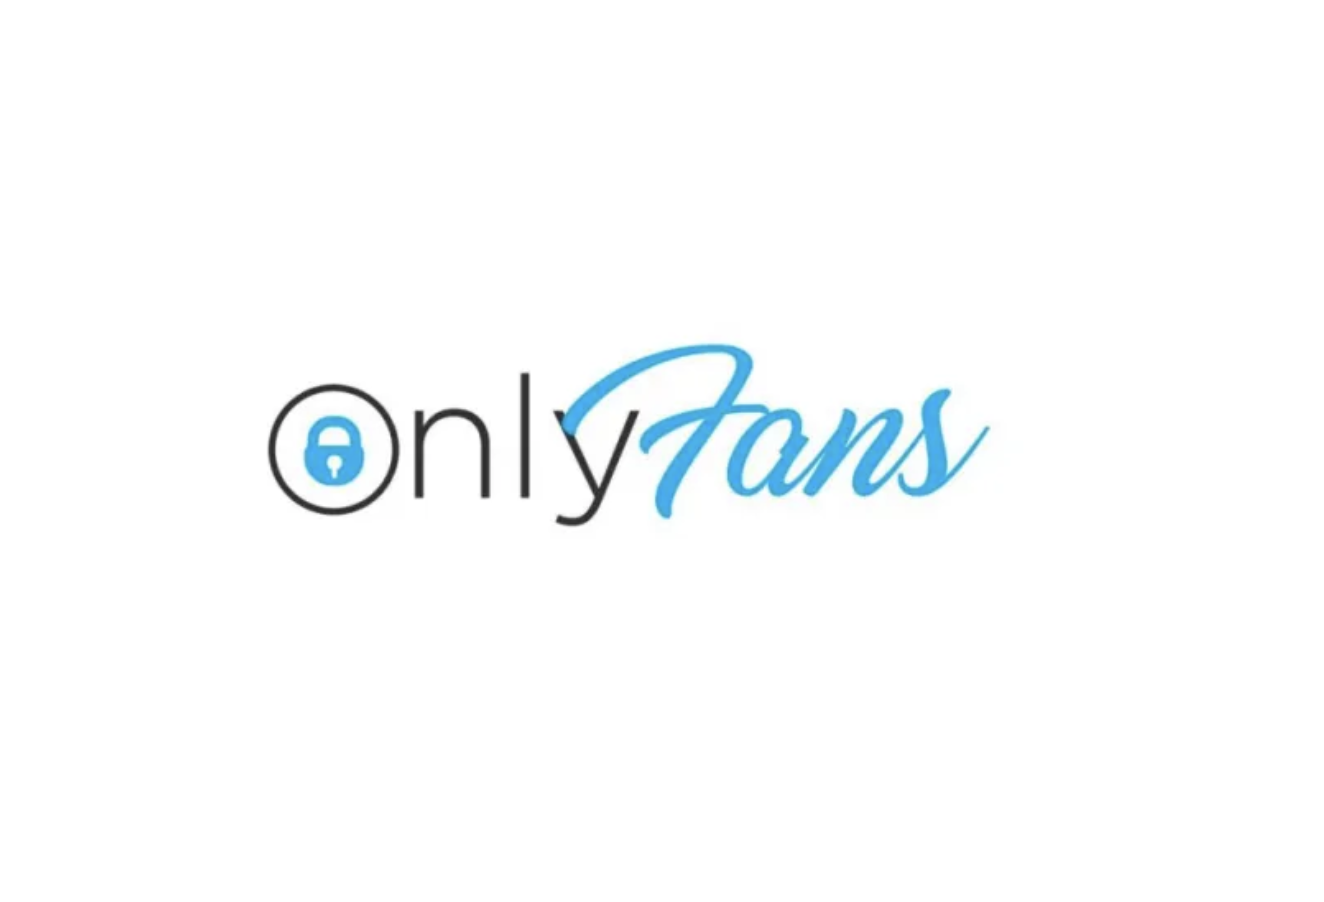 How to Make Money on OnlyFans Without Showing Your Face